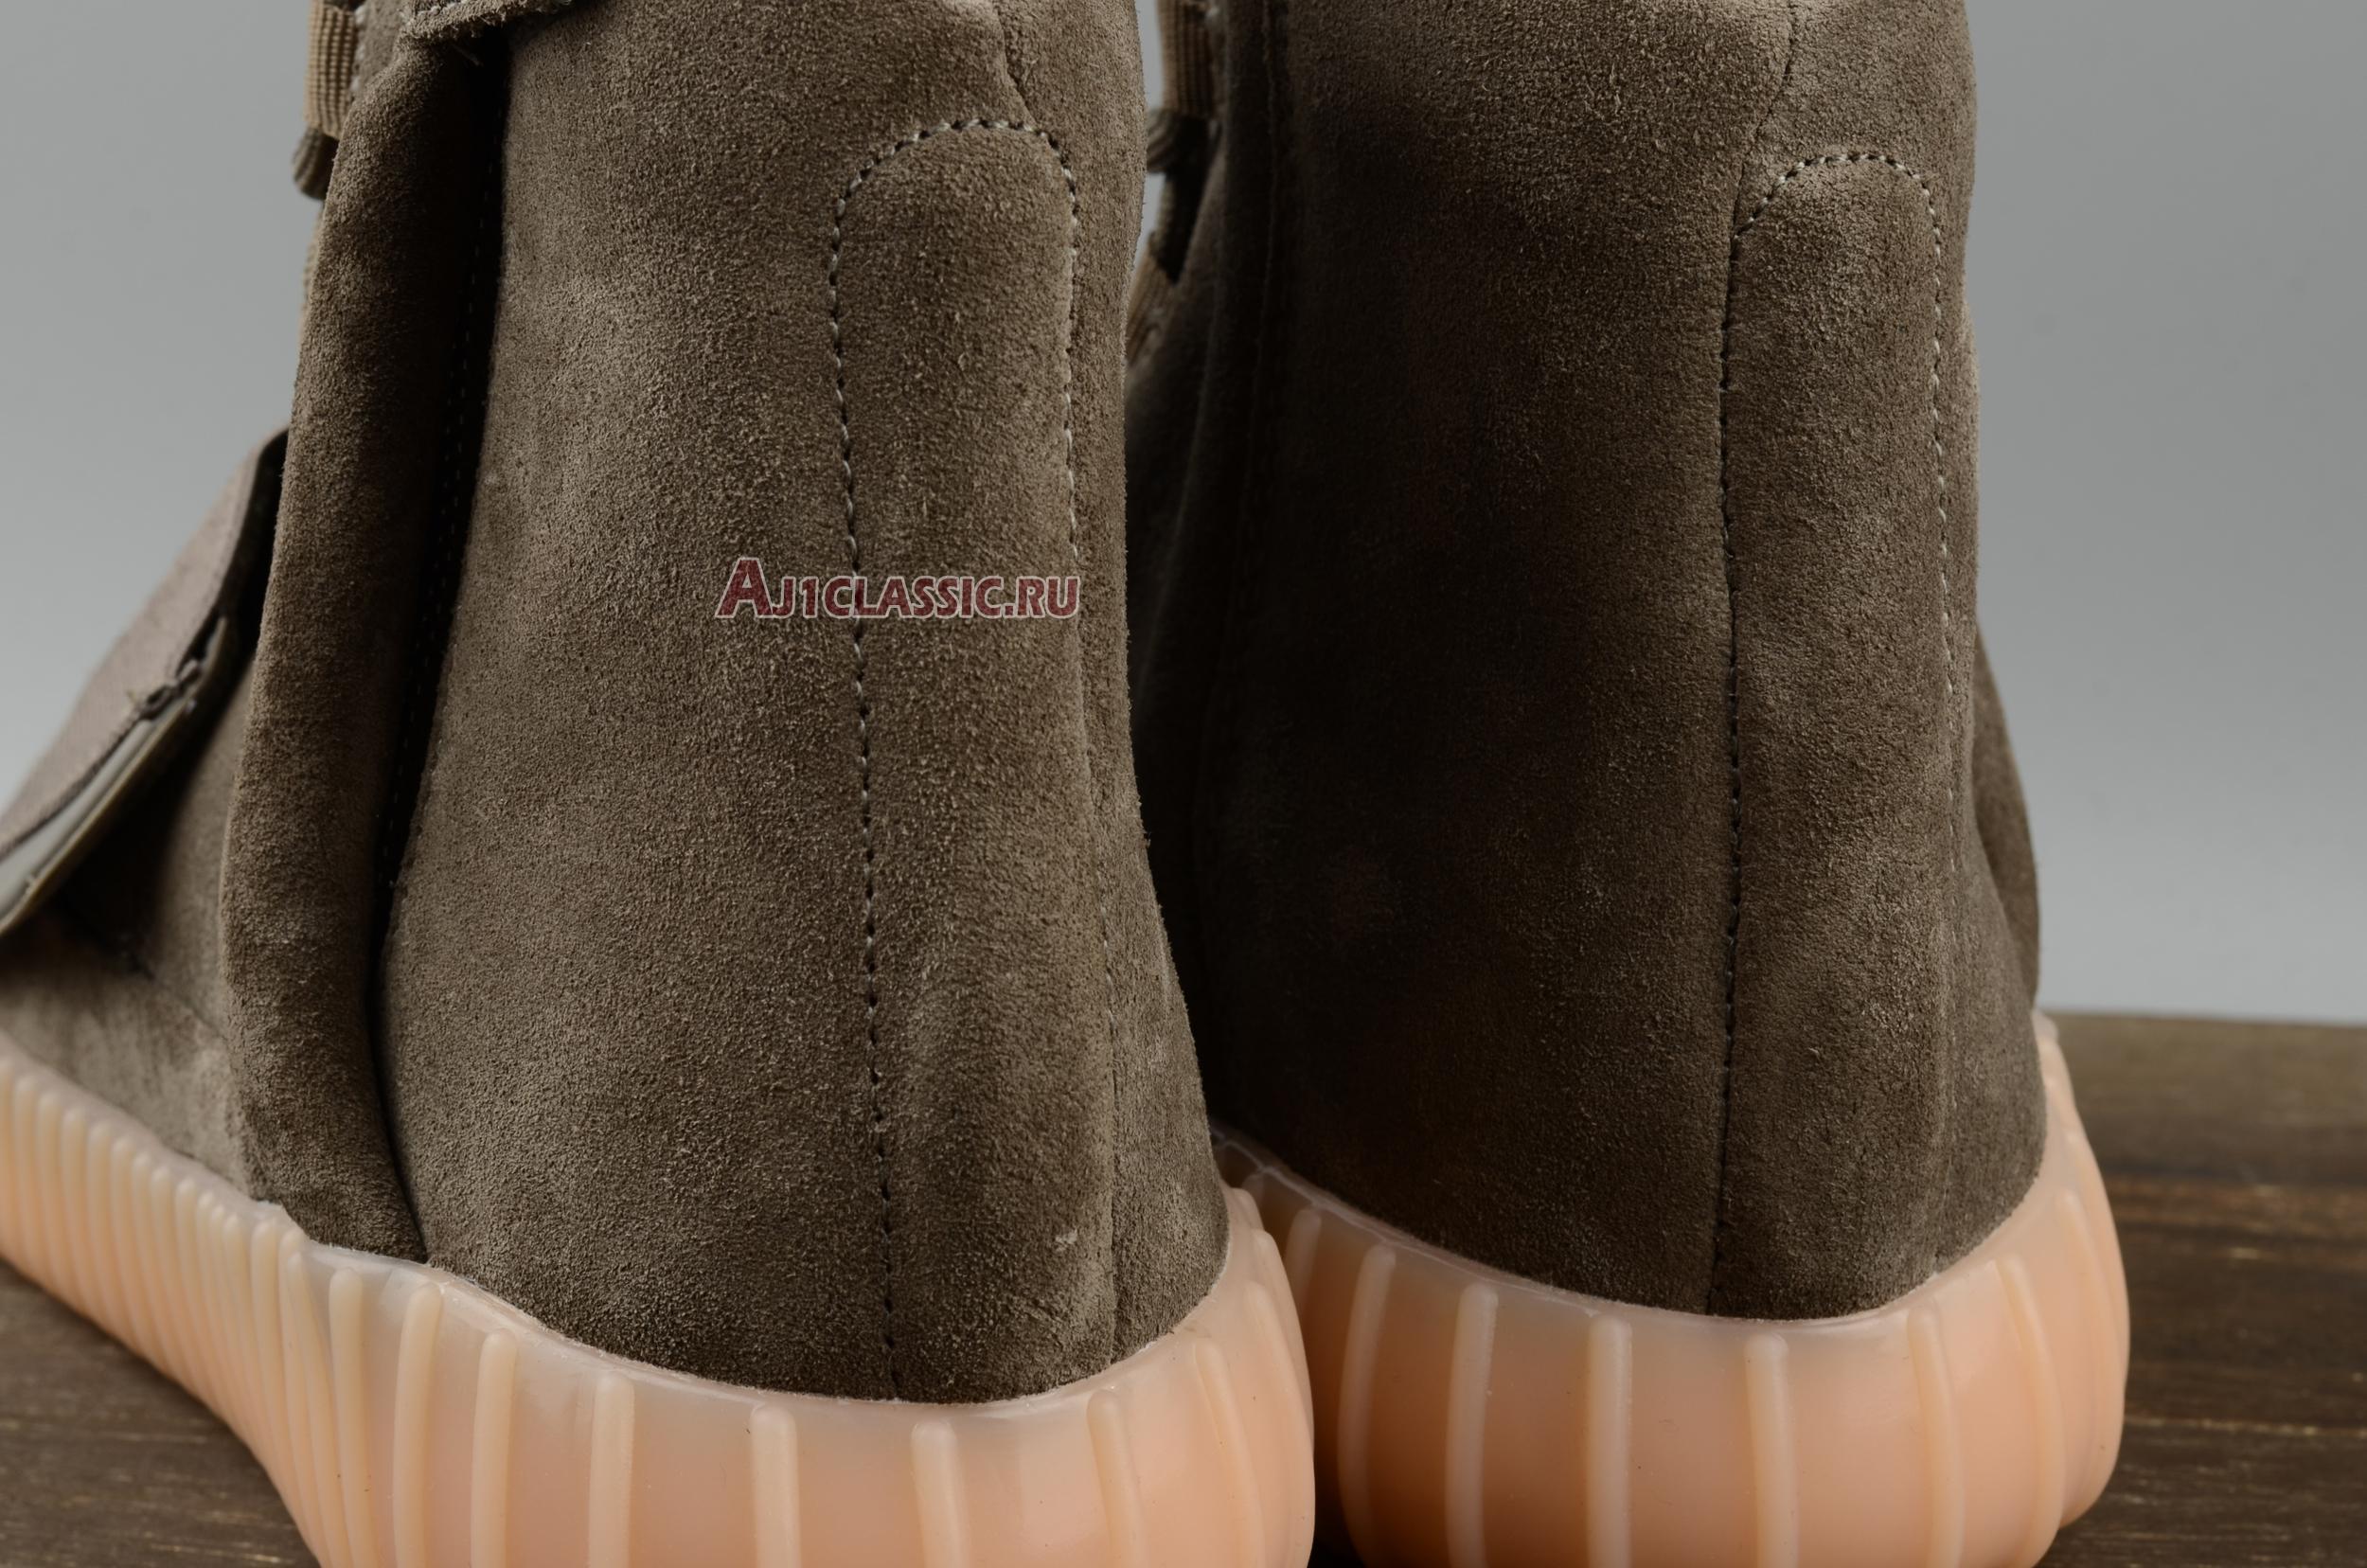 Adidas Yeezy Boost 750 "Chocolate" BY2456